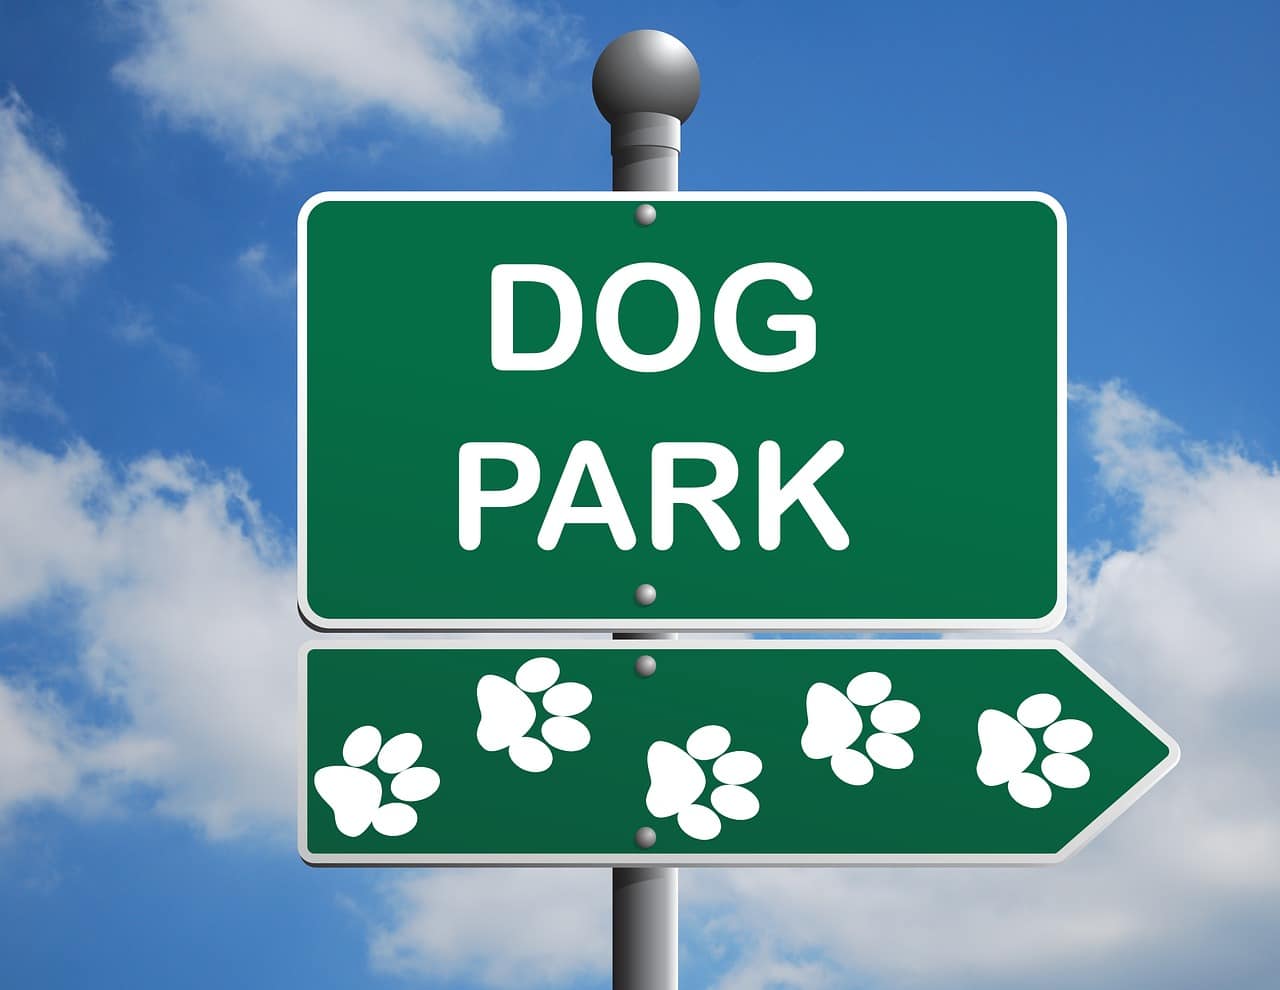 A green dog park sign with white writing on it